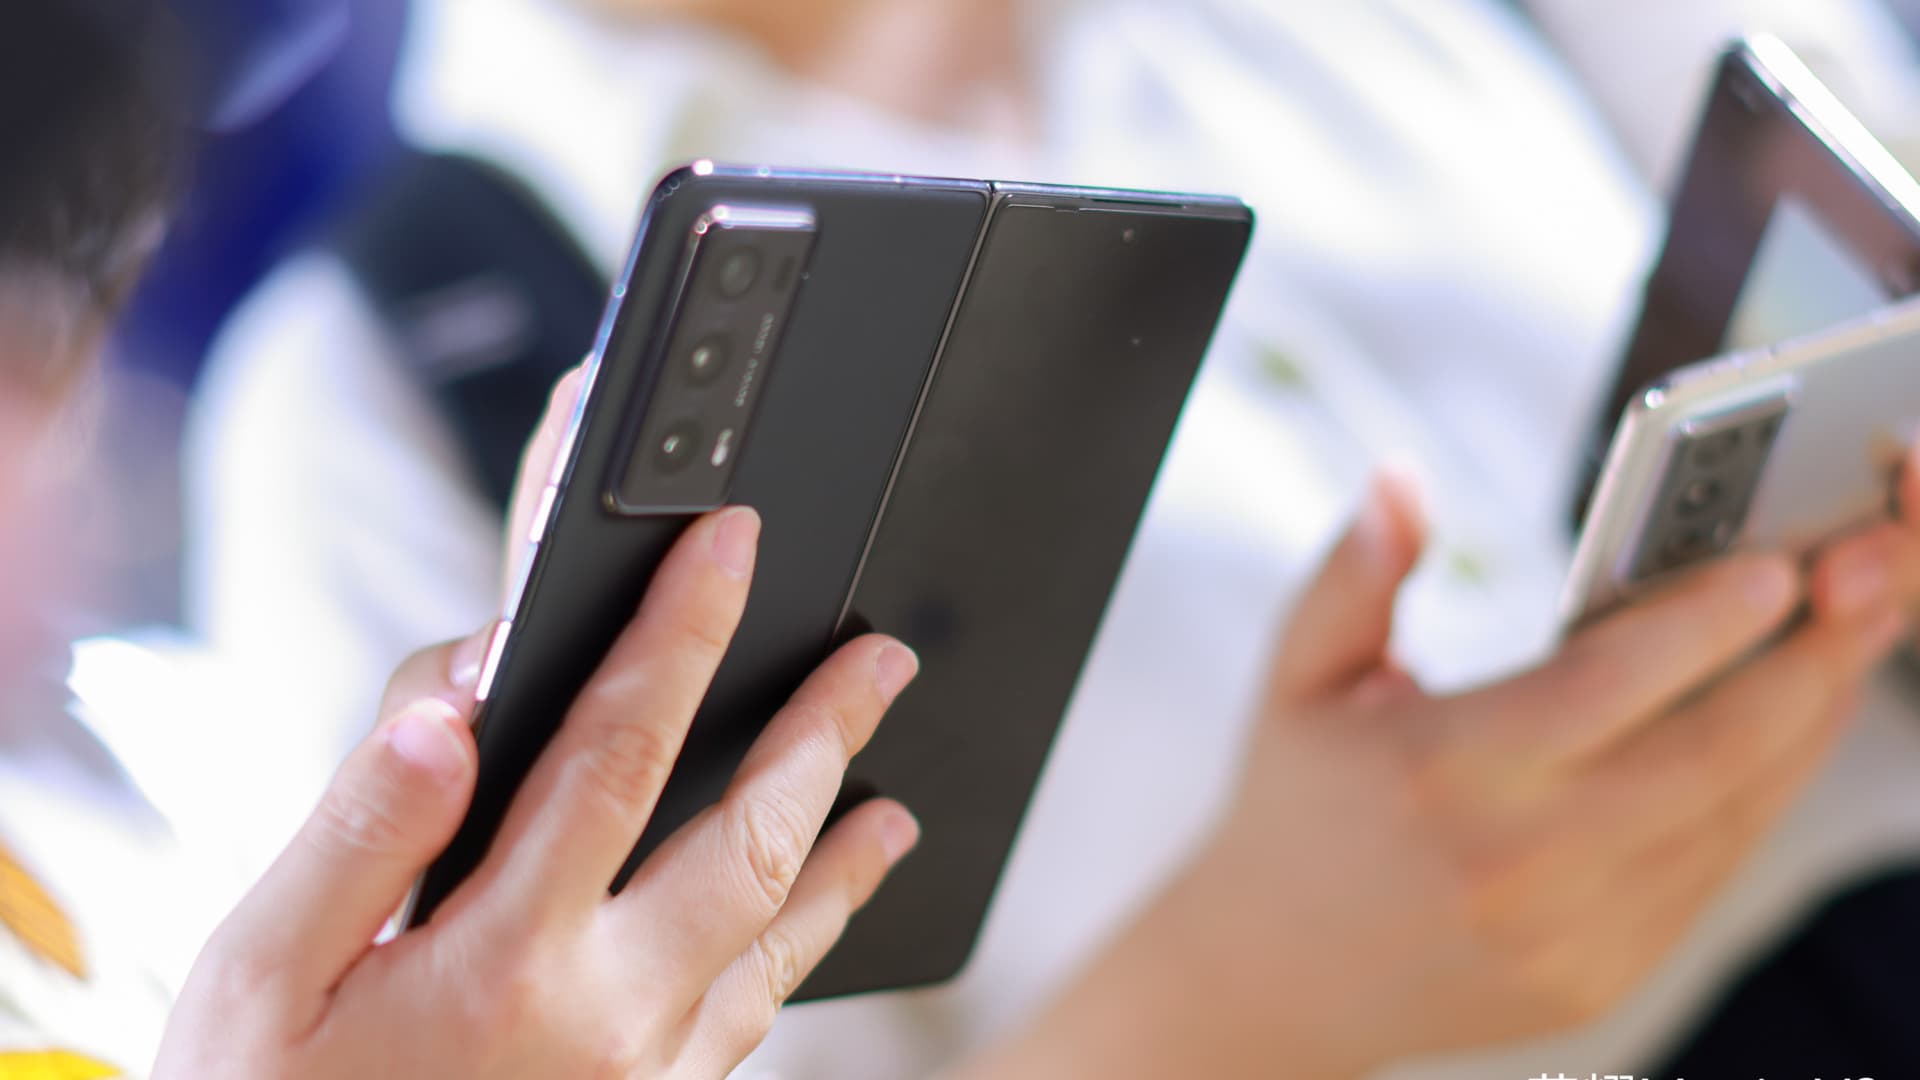 A new foldable smartphone is becoming as popular as an Apple iPhone model in China